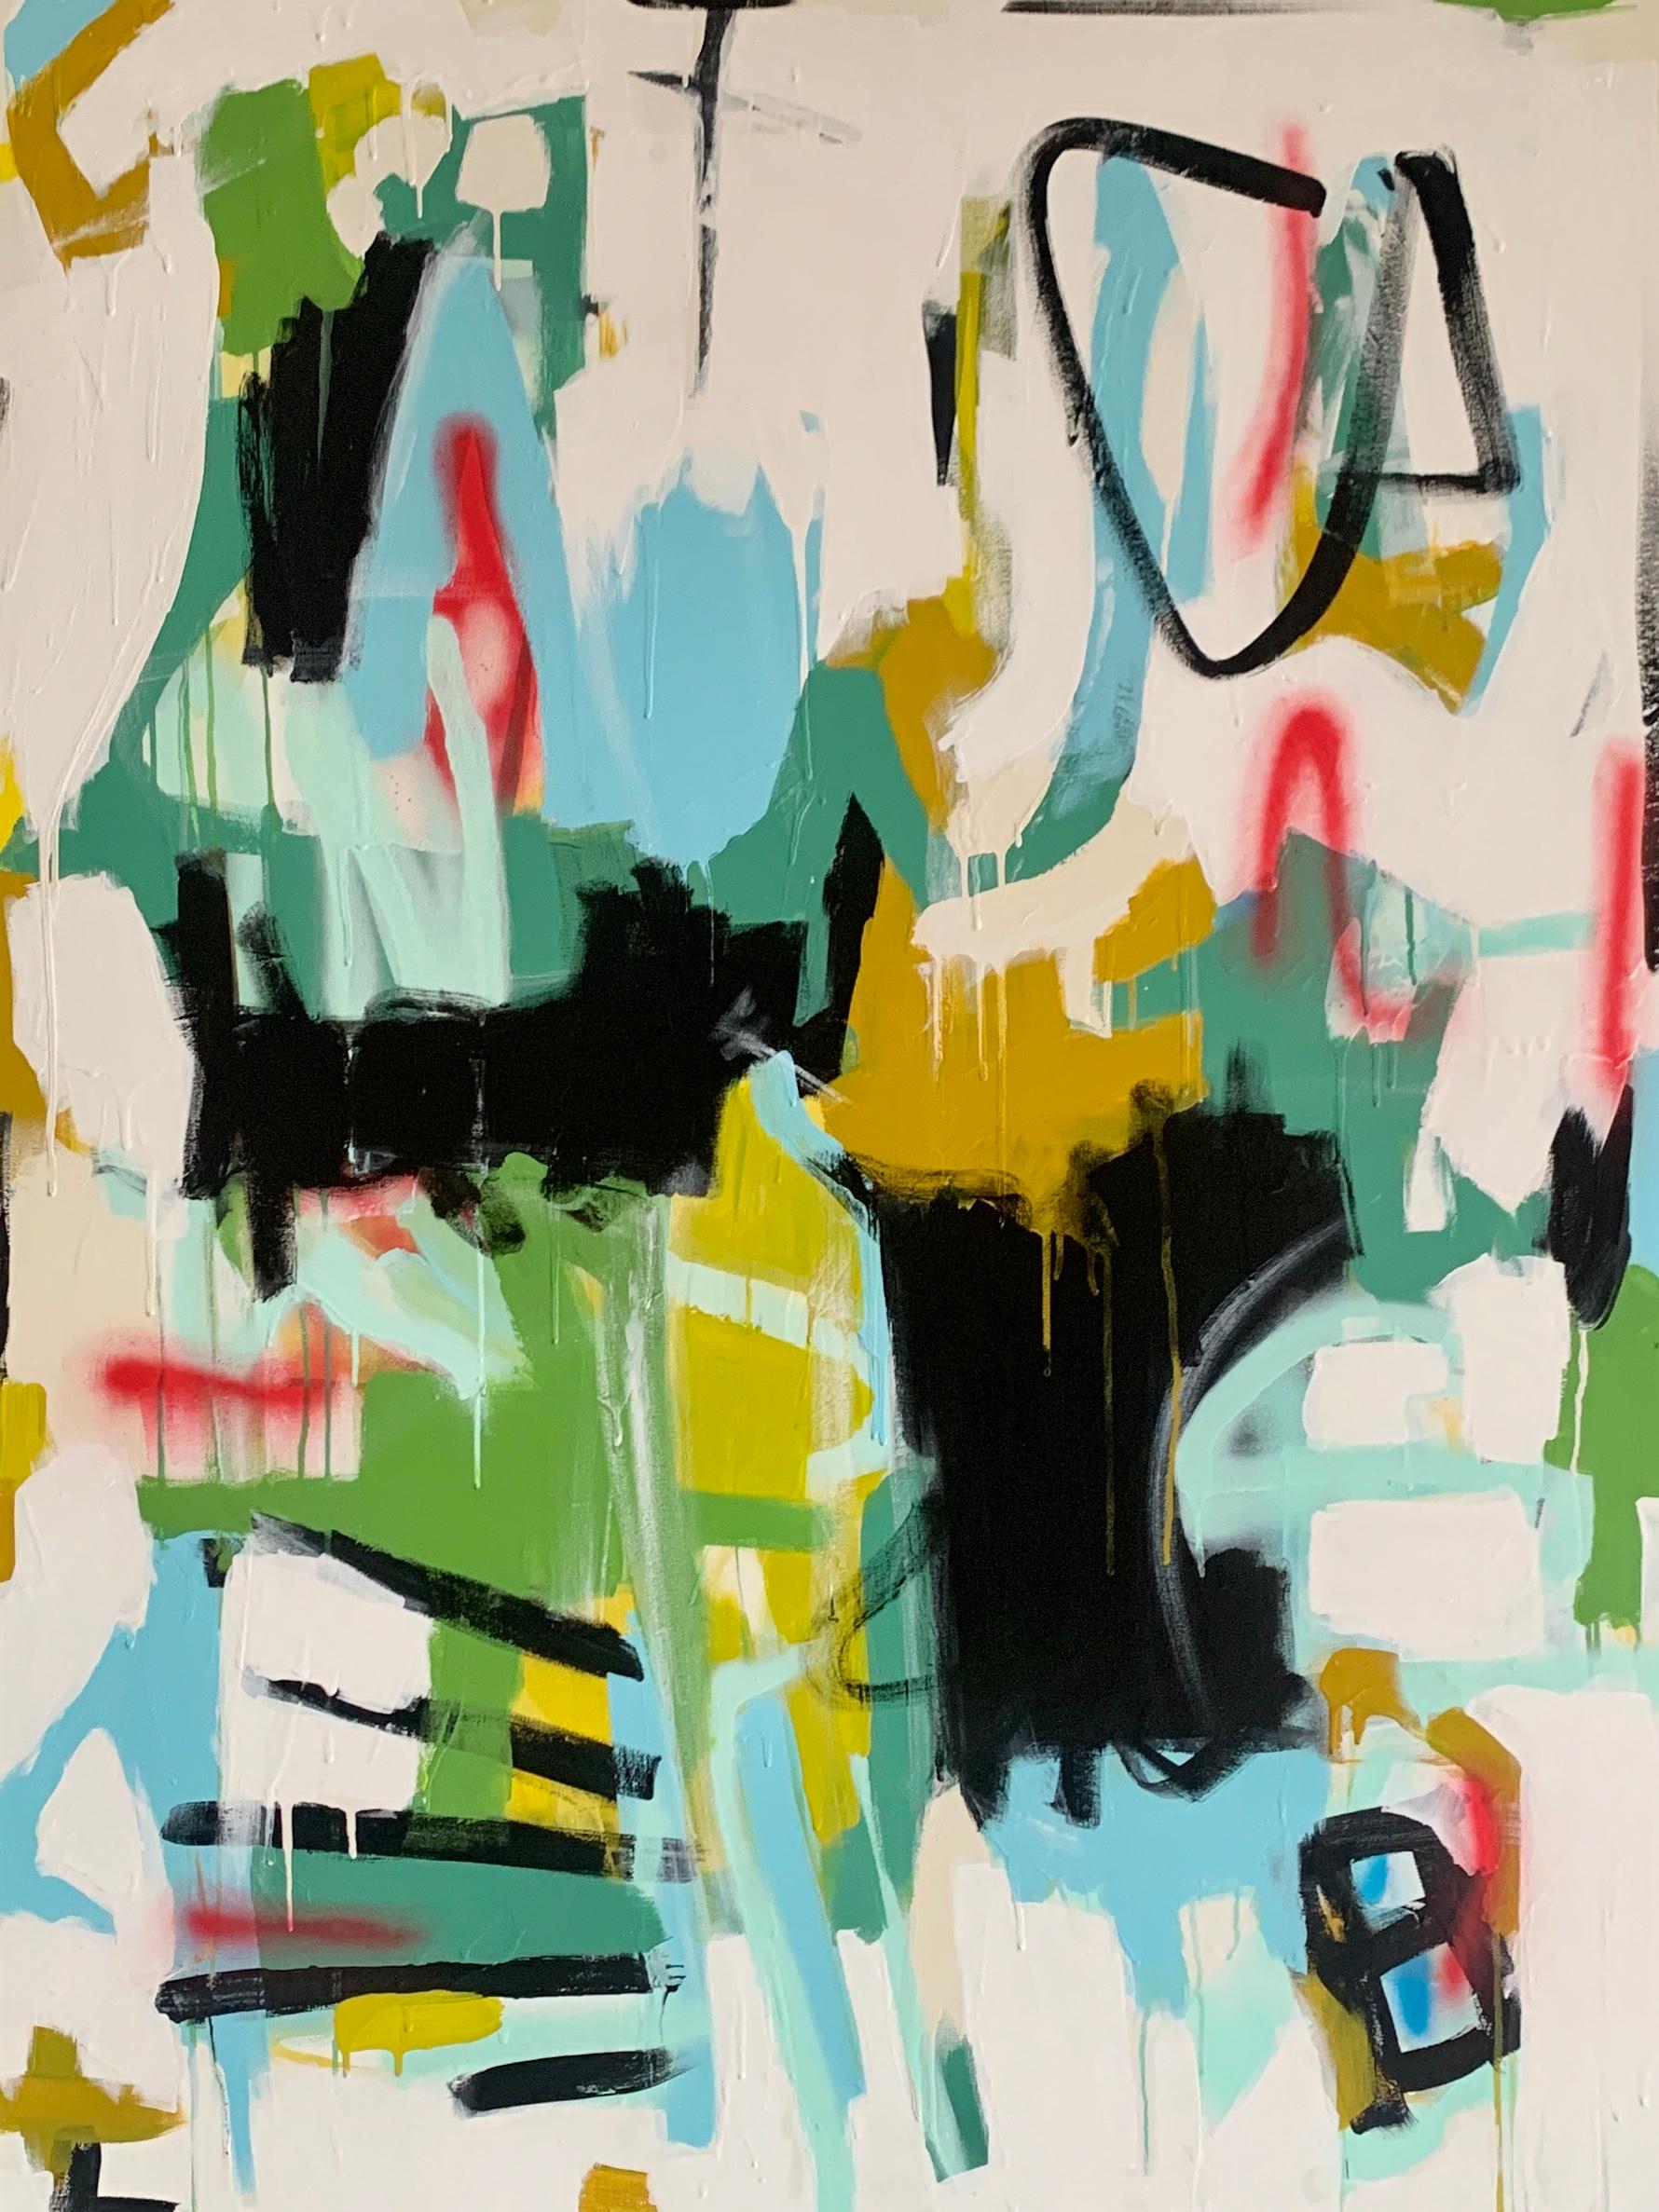 'Here I Am' is a large mixed media on canvas abstract painting of vertical format created by American artist Annie King in 2020. Featuring a palette made of  black, blue, yellow, pink, green and other tones, this painting showcases joyous fields of